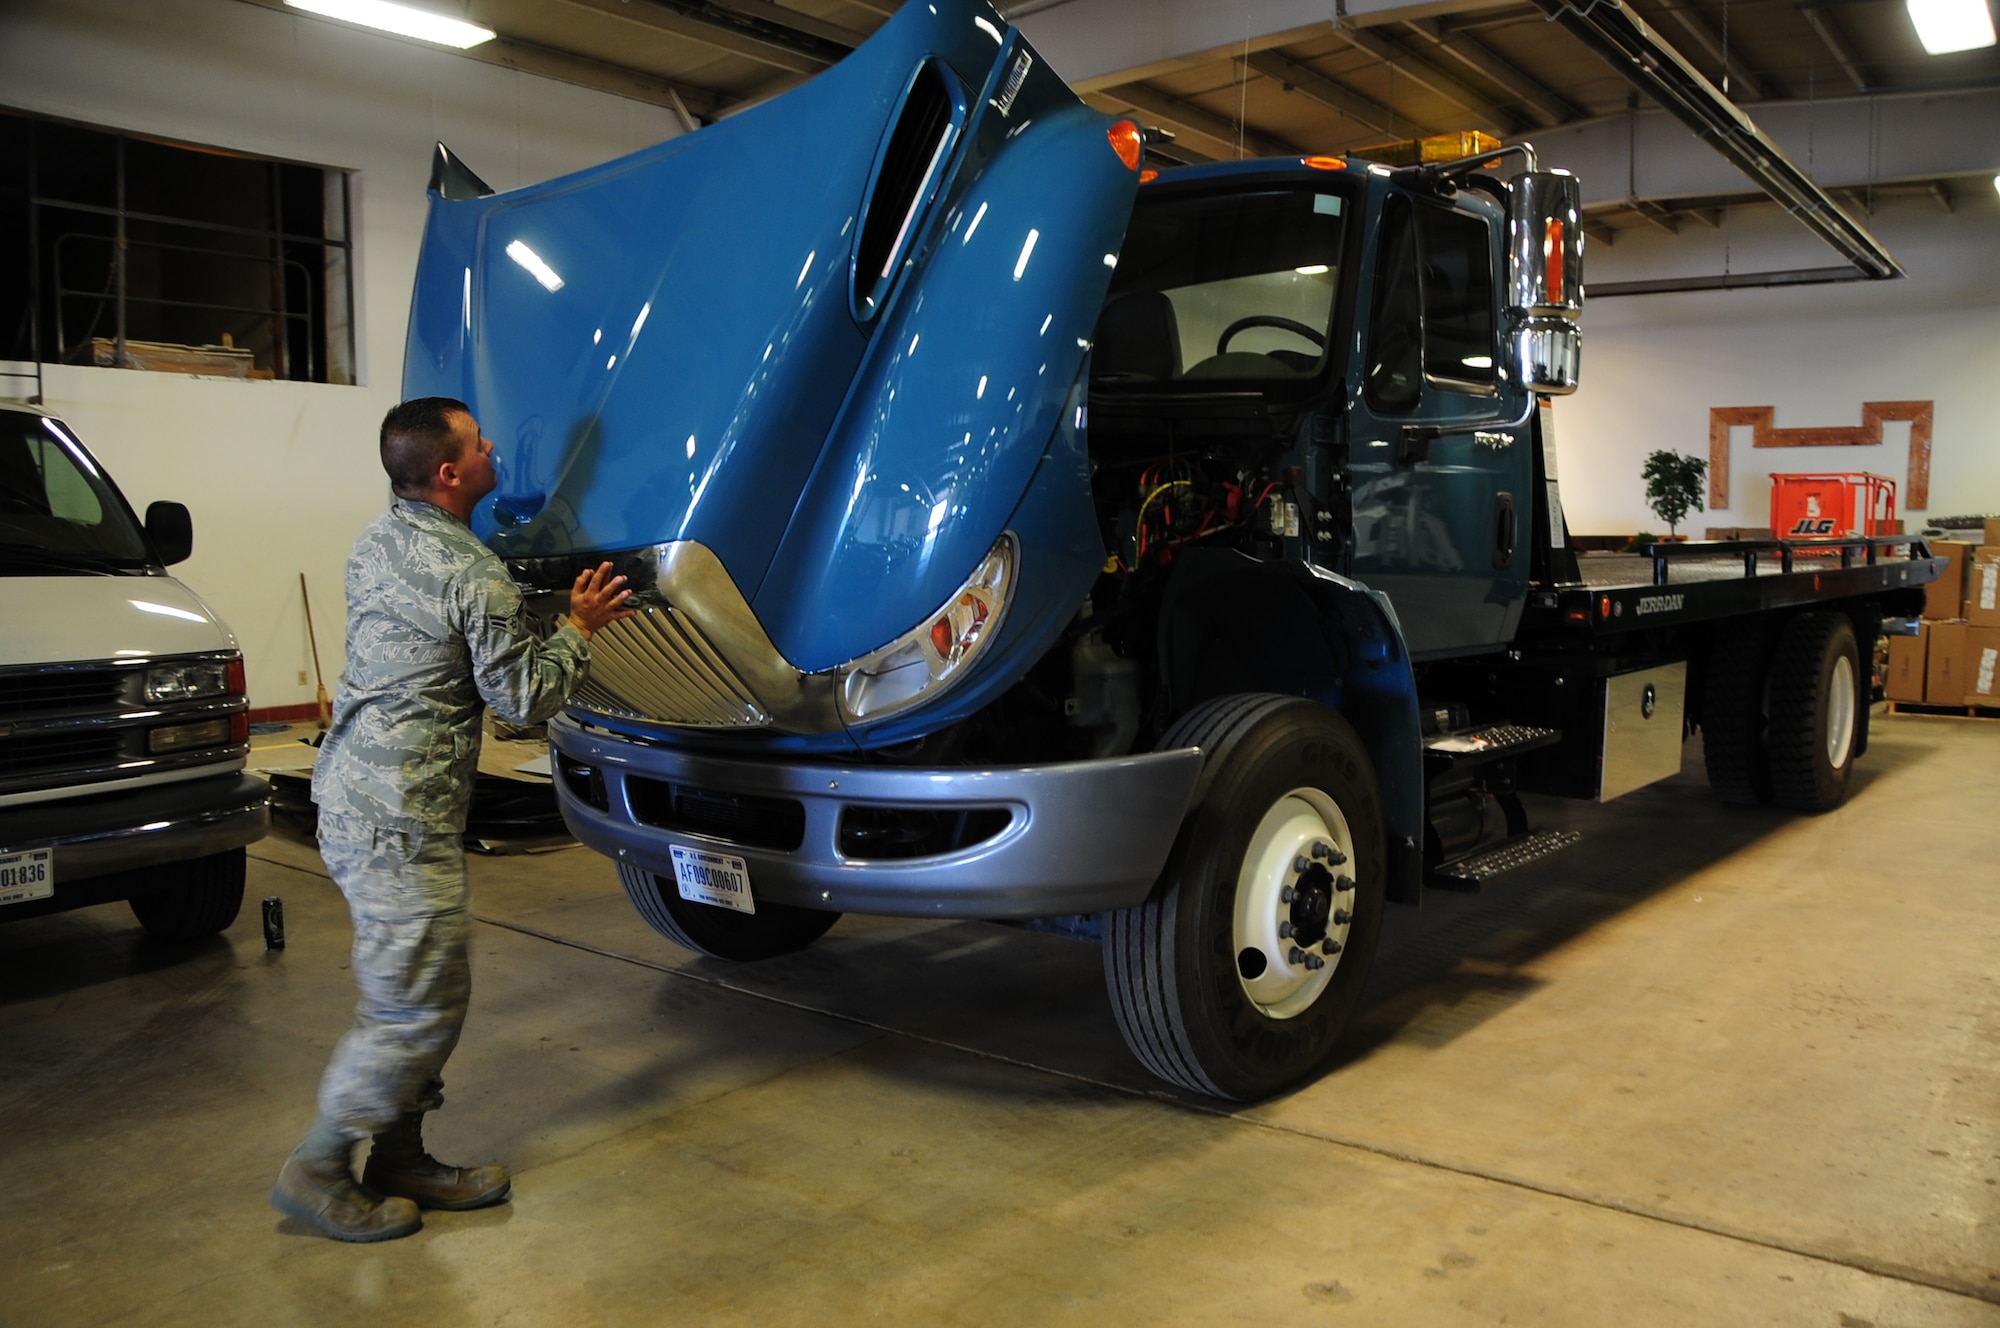 ELLSWORTH AIR FORCE BASE, S.D. -- Airman 1st Class Gregory Hulett, 28th Logistics Readiness Squadron, vehicle operator, does pre-operational checks on a flatbed truck, Oct. 6.  While the handling and delivery of cargo is a primary function of the vehicle operations control center shop, it’s not the only role they are required to fill in support of missions both stateside and downrange. (U.S. Air Force photo/Airman 1st Class Anthony Sanchelli)